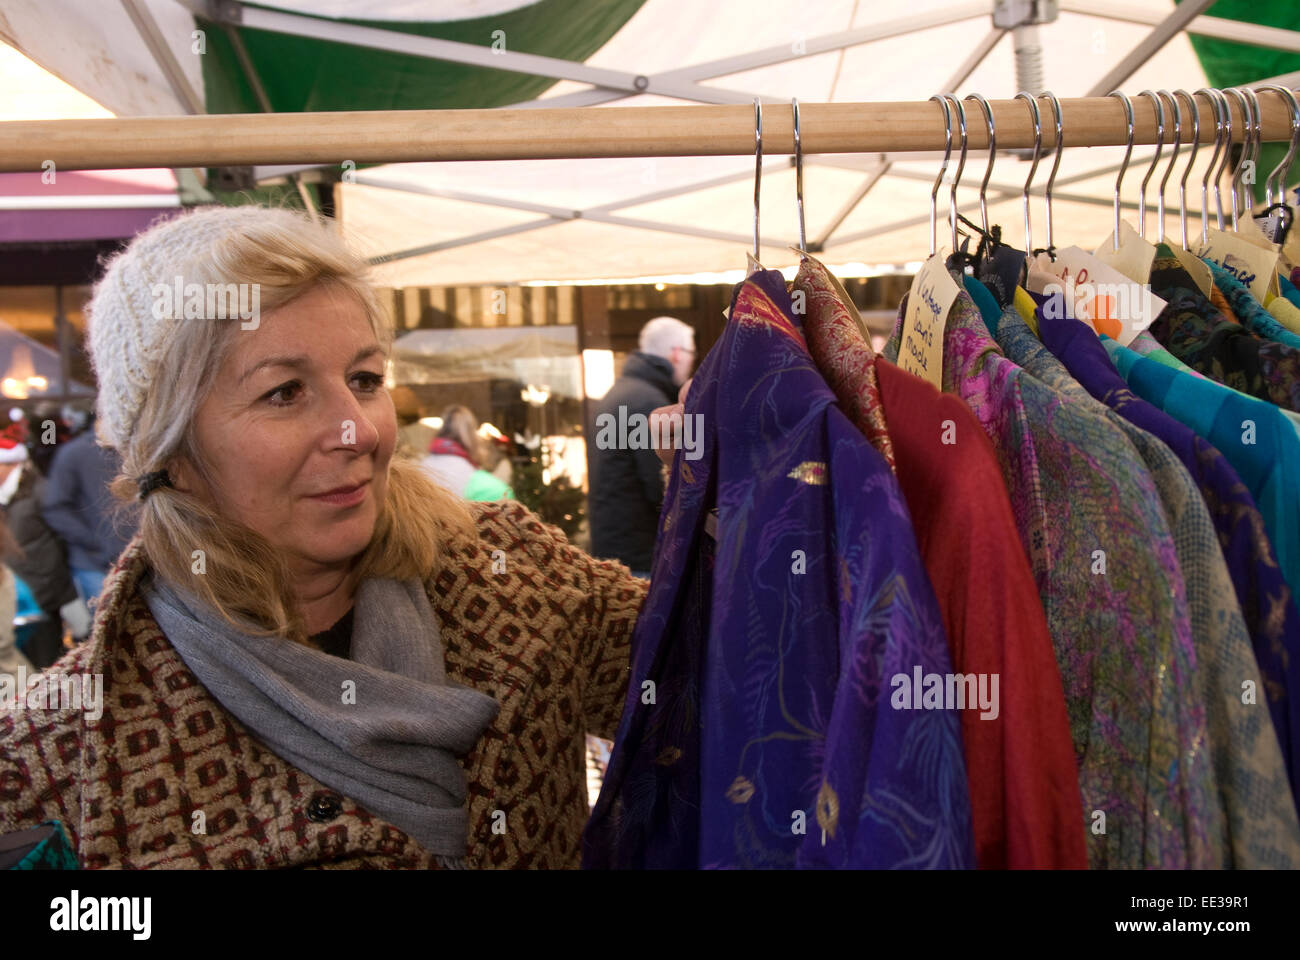 Woman perusing clothes stall at an outdoor christmas market, Haslemere, Surrey, UK. Stock Photo